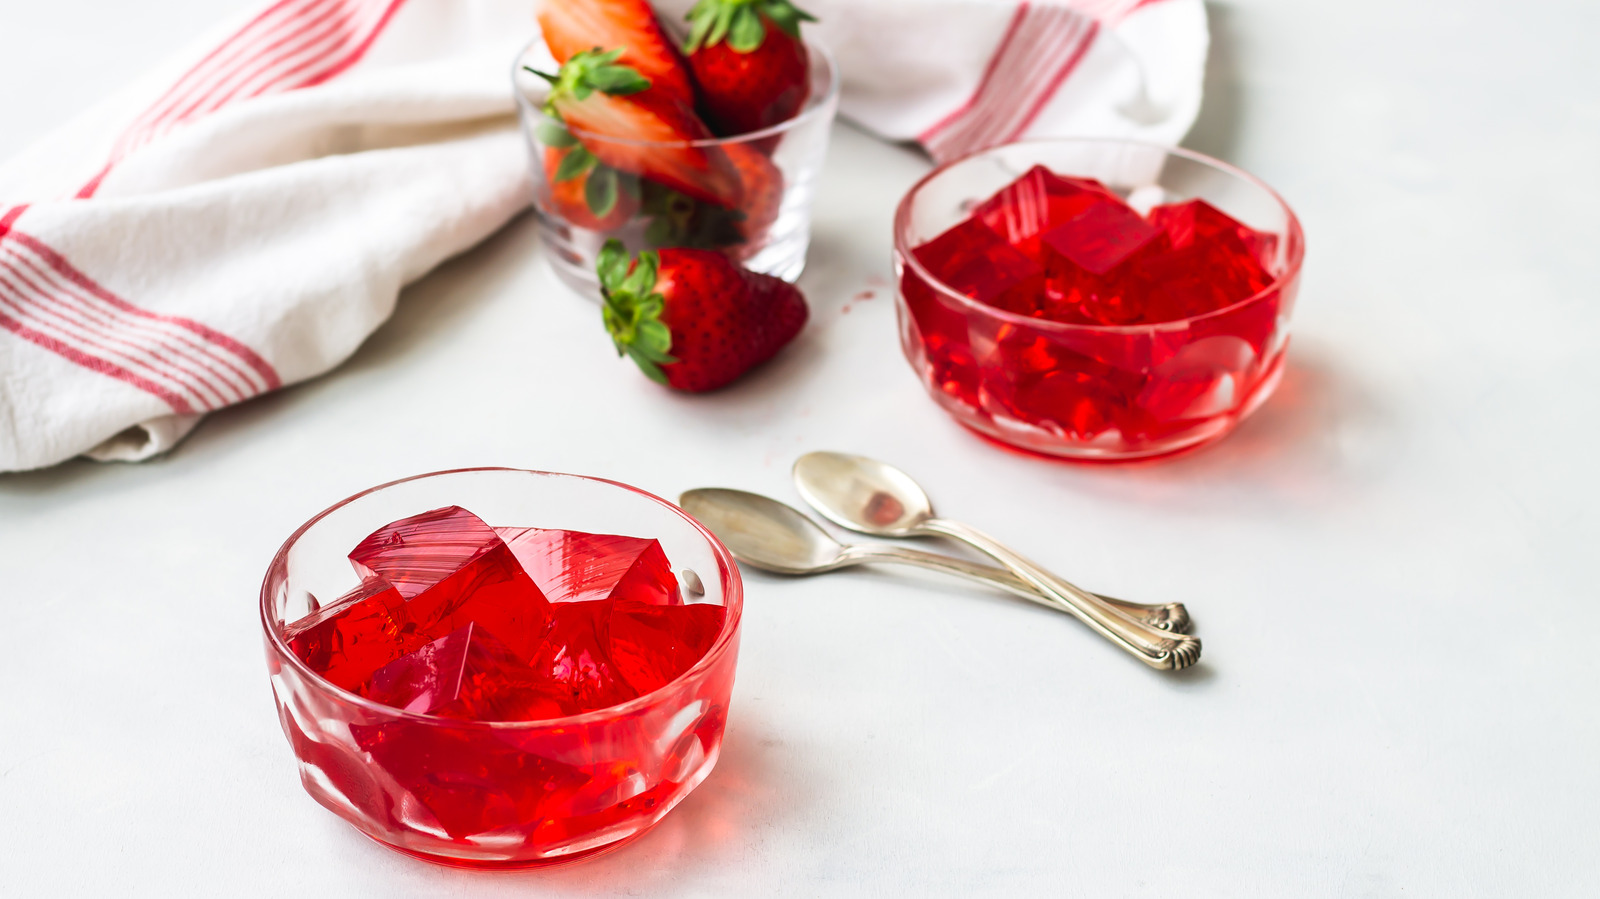 Jell-O to kids: Play with your food